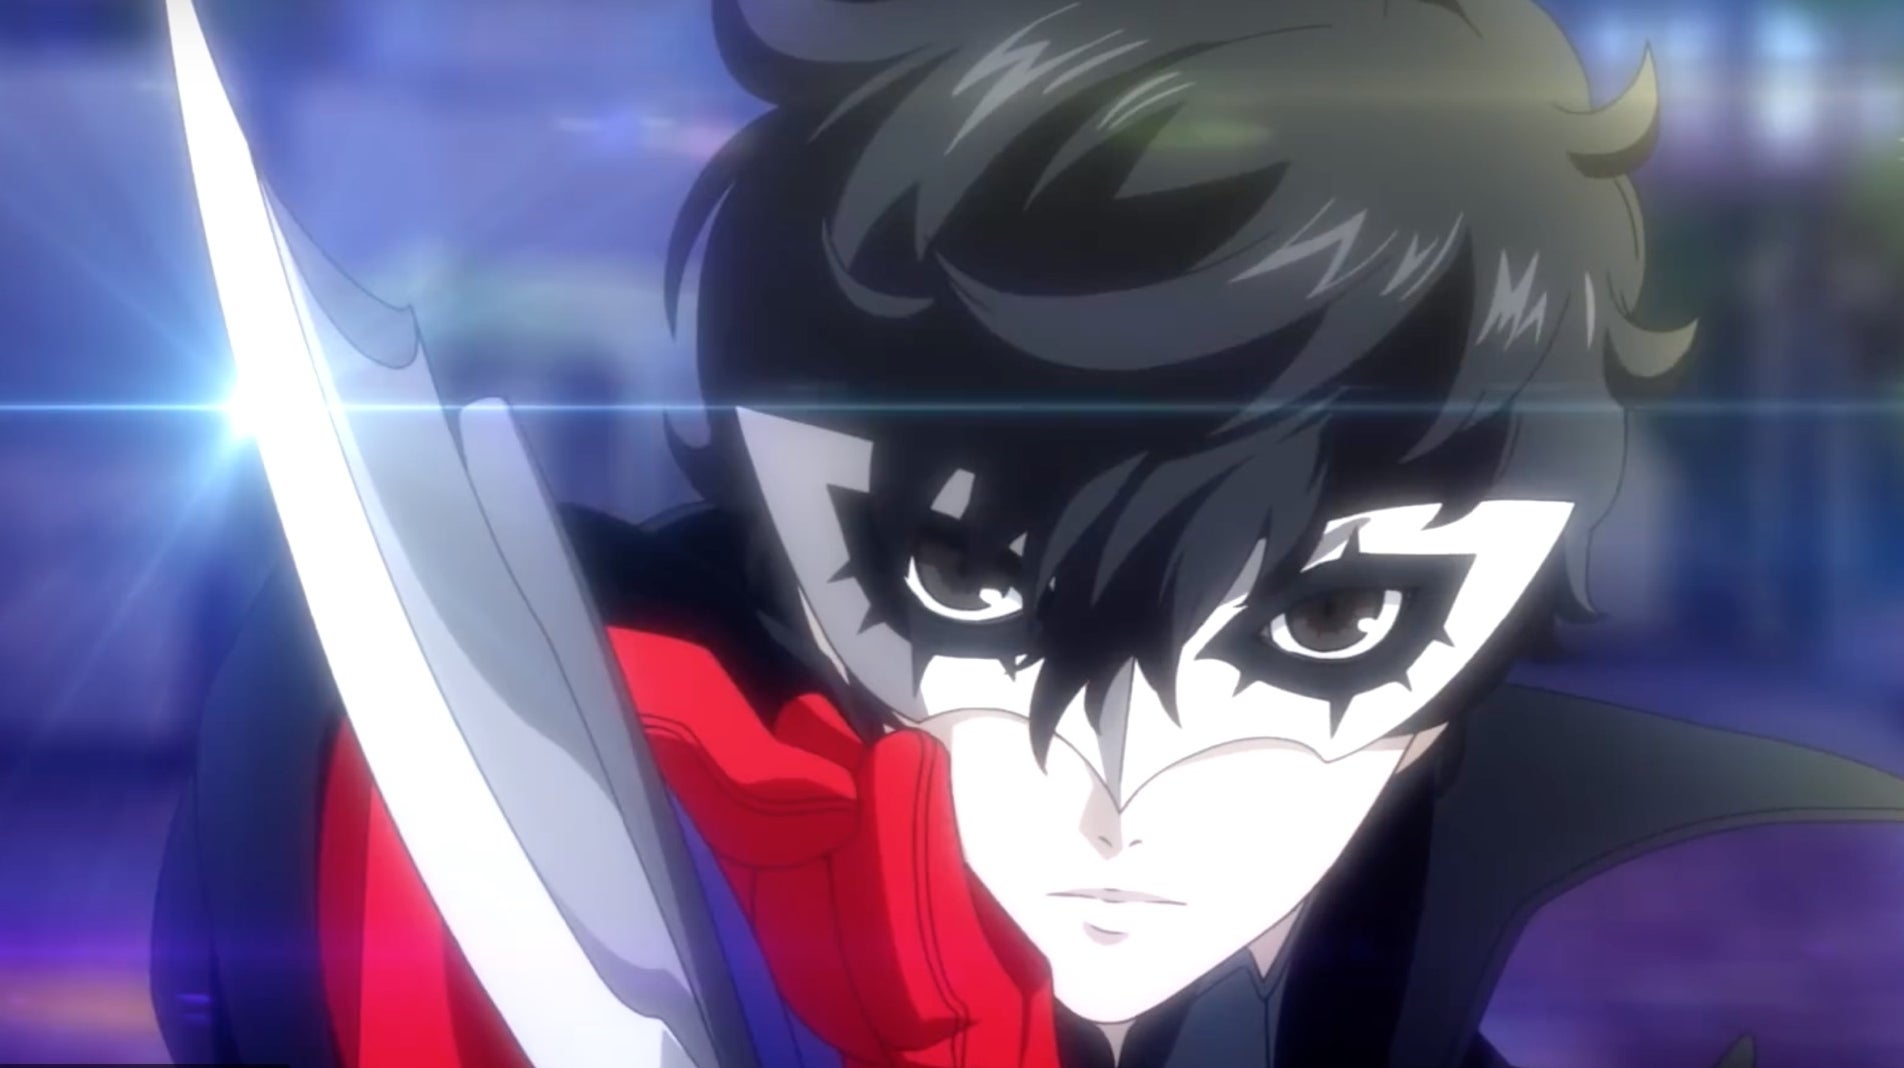 Image for Atlus' mysterious Persona 5 S is a Warriors-style action game for PS4 and Switch